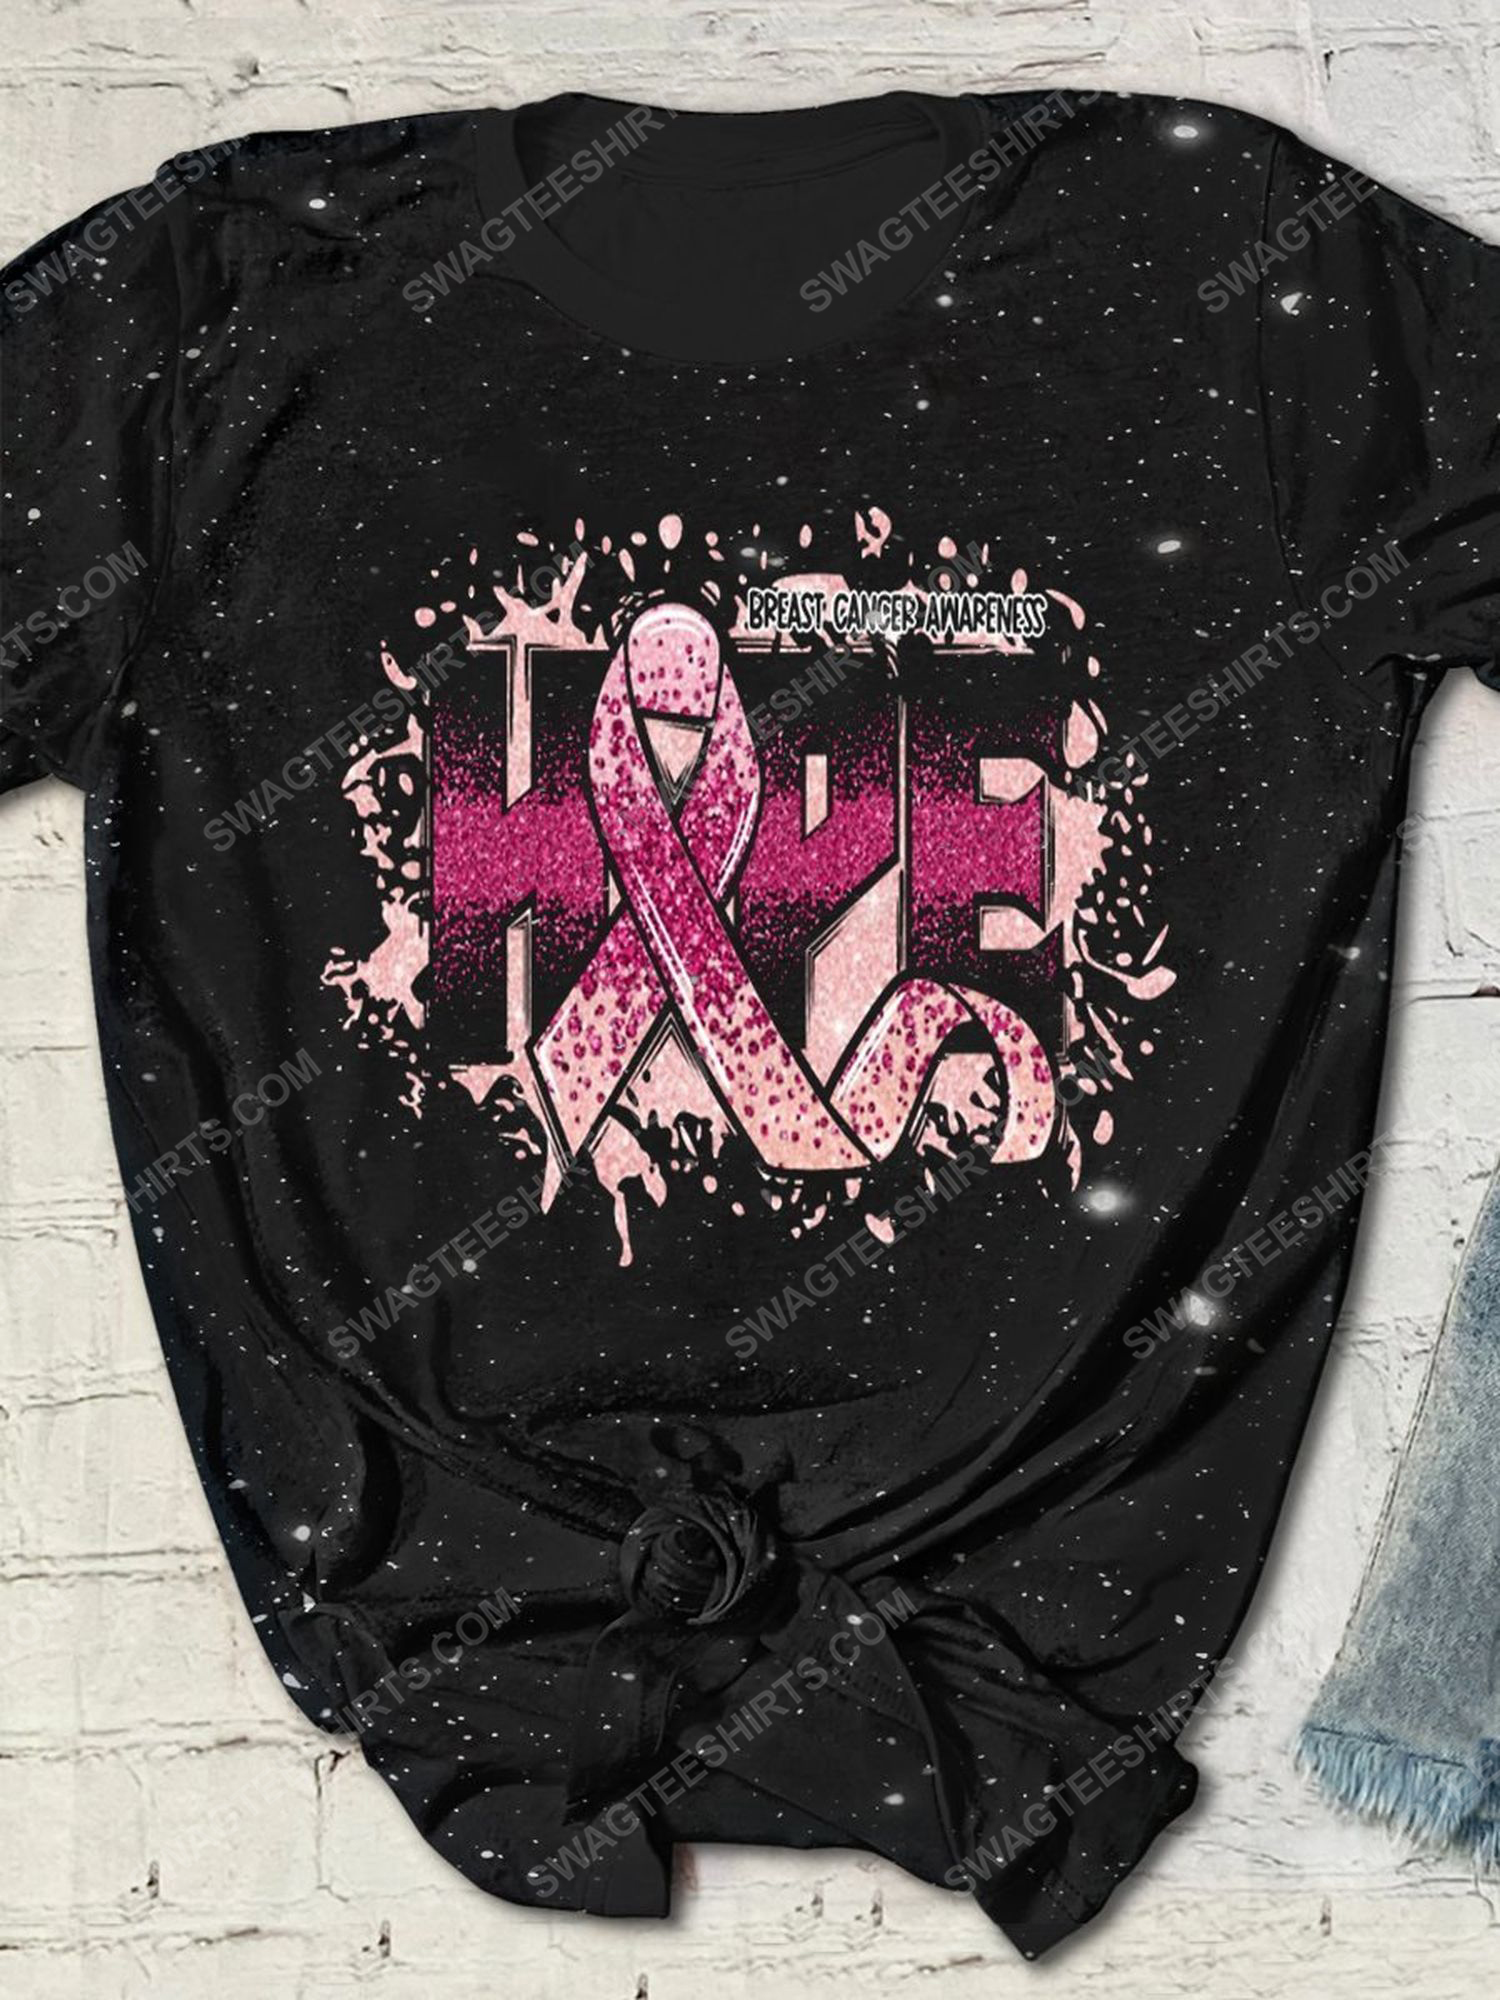 Breast cancer awareness hope bleached shirt 1 - Copy